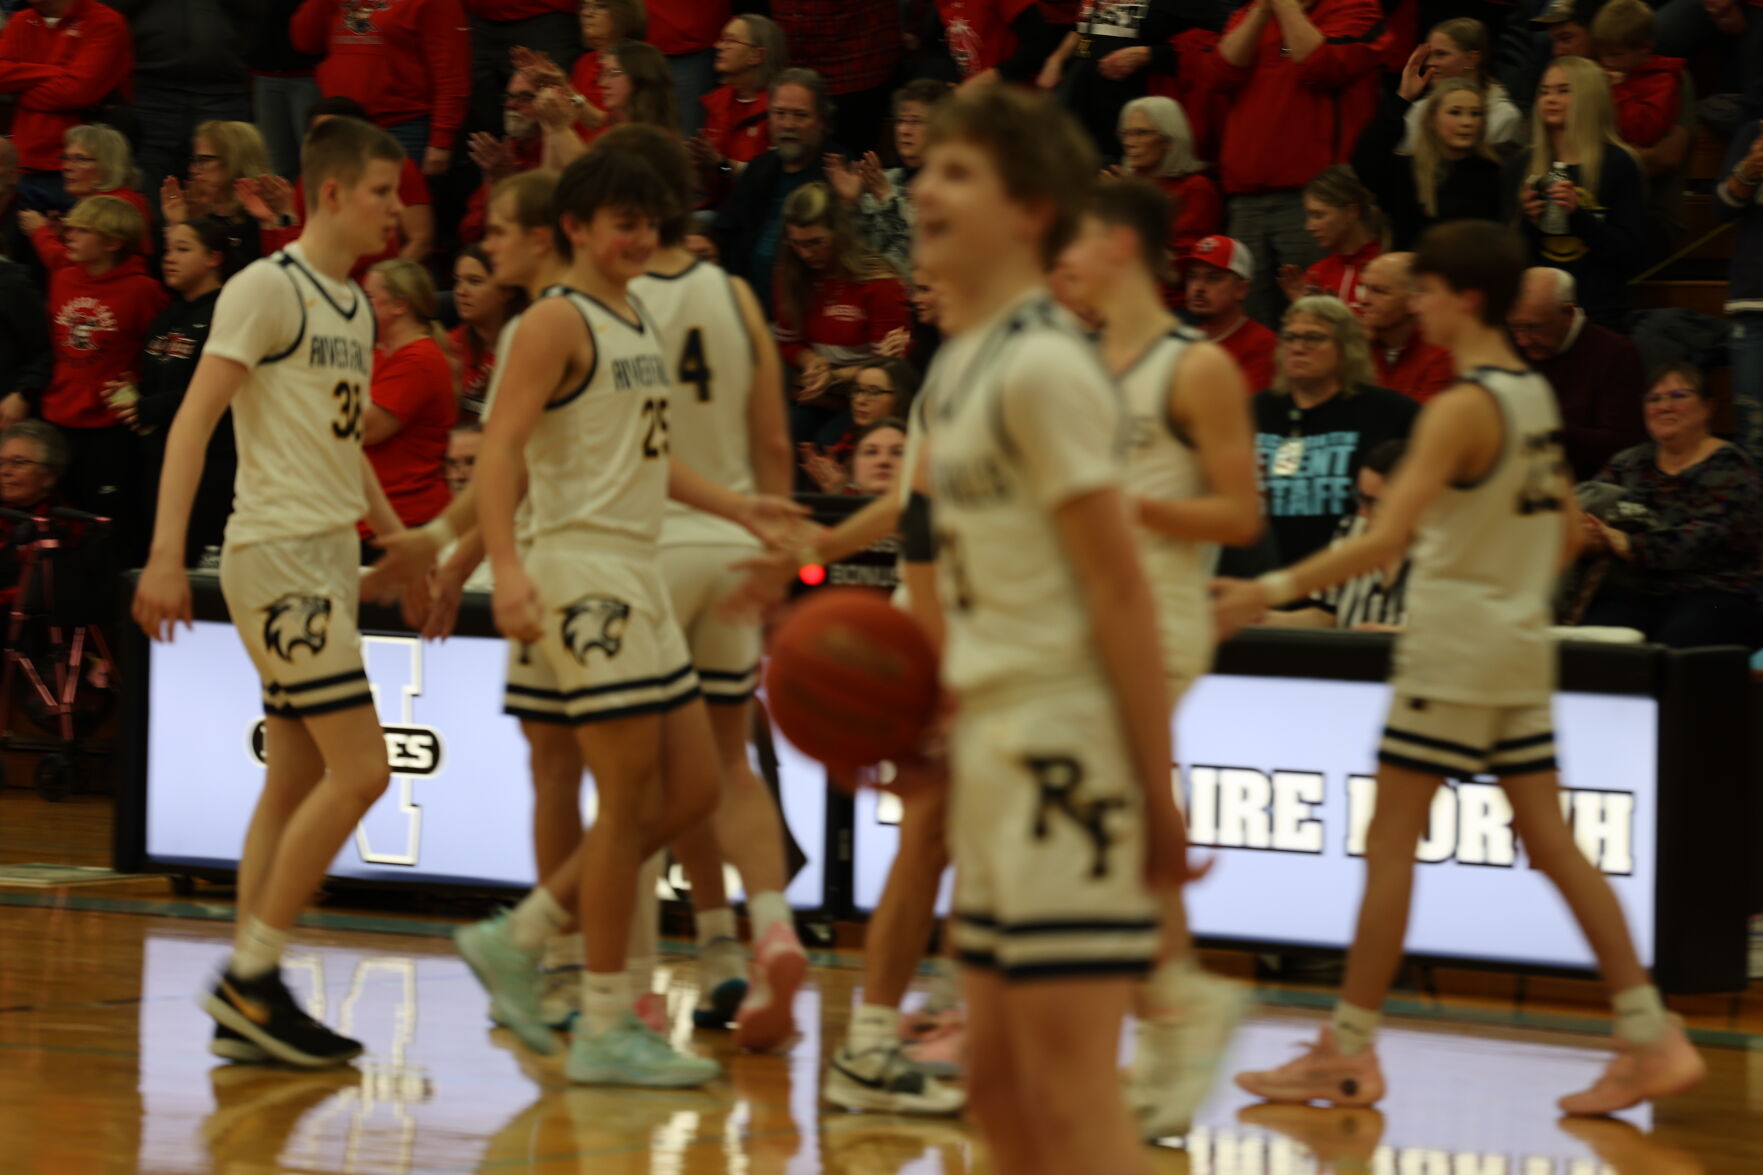 River Falls pulls away late from Wausau East, moves on to sectional finals